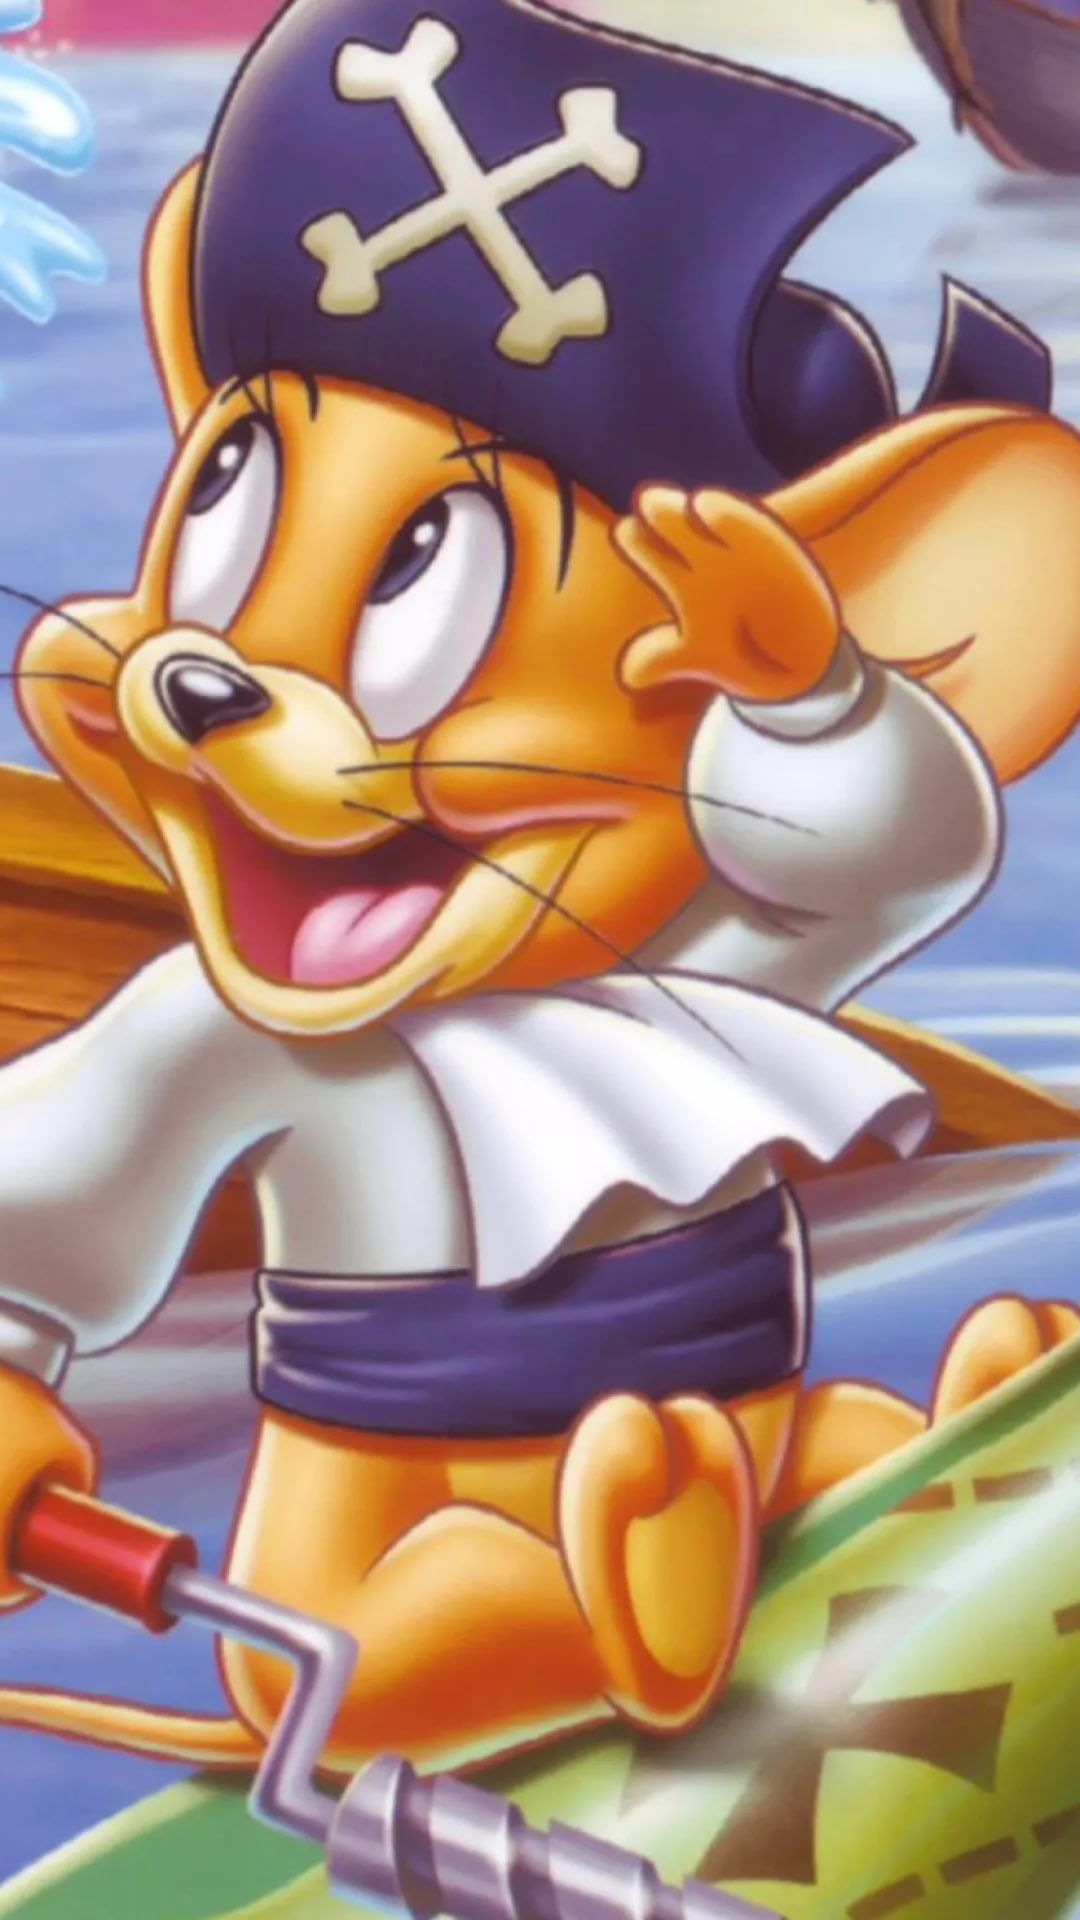 Tom And Jerry Iphone 6 Plus Wallpaper - Jerry Shiver Me Whiskers - HD Wallpaper 